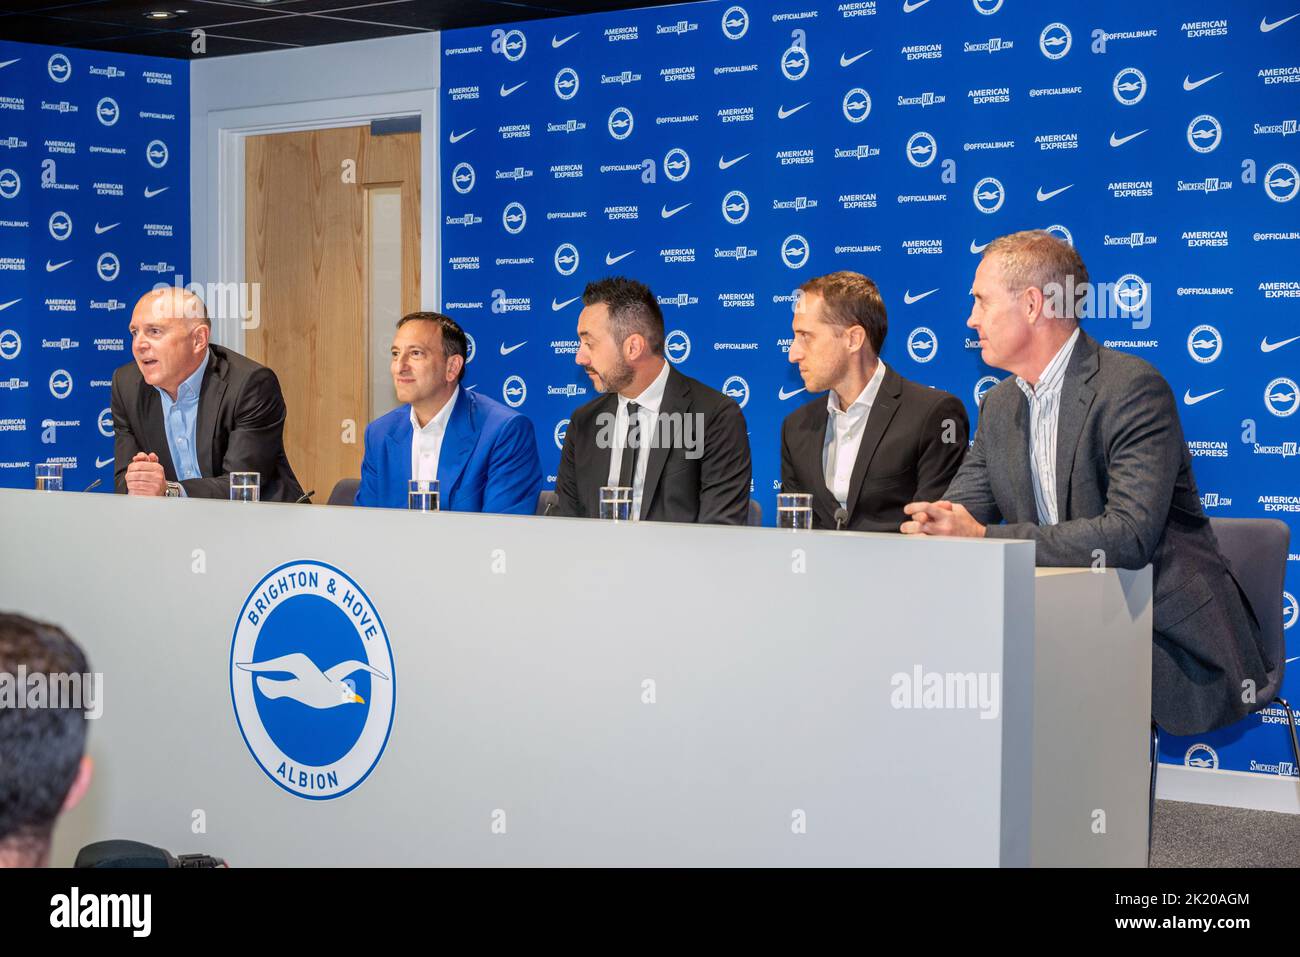 Brighton, September 20th 2022: Brighton and Hove Albion FC's new manager Roberto de Zerbi is introduced to the press this afternoon at the club's trai Stock Photo